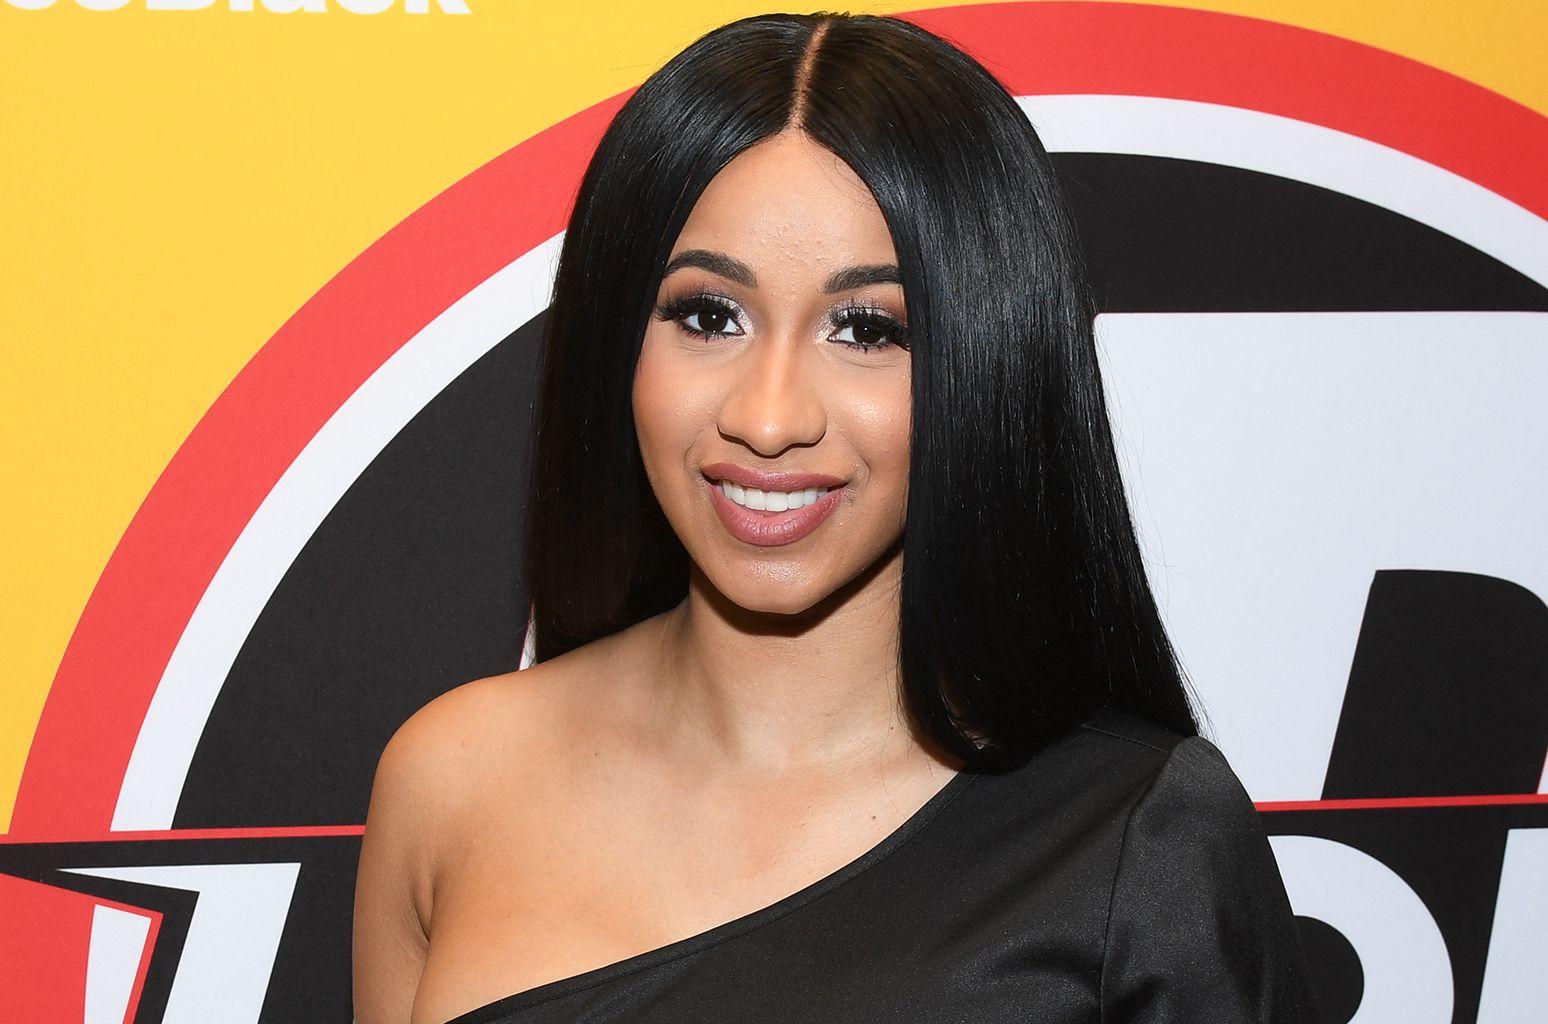 An Introduction To Cardi B: The 'Bodak Yellow' Rapper Me